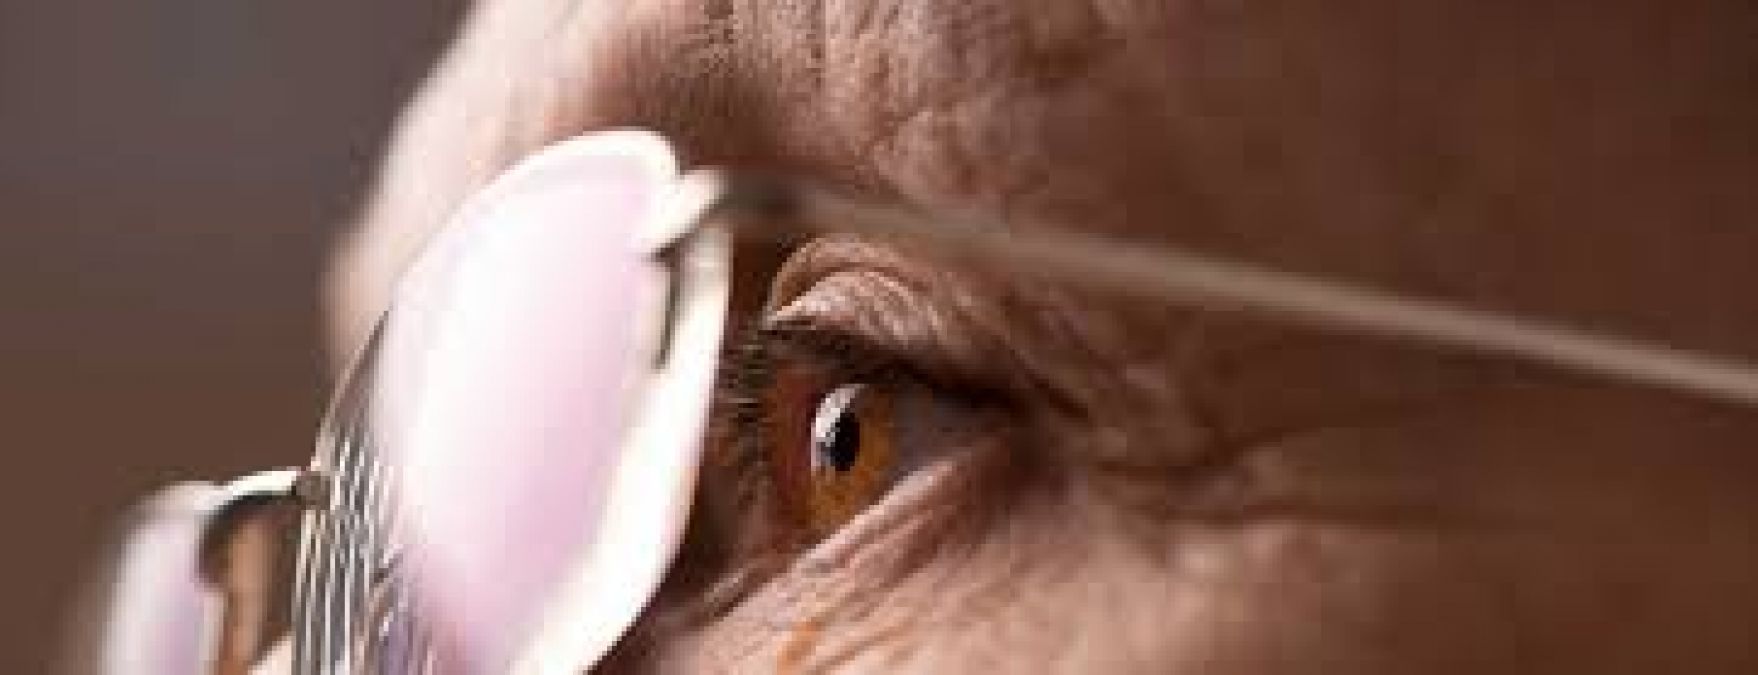 These are the Four Steps to Help Prevent Diabetic Eye Diseases